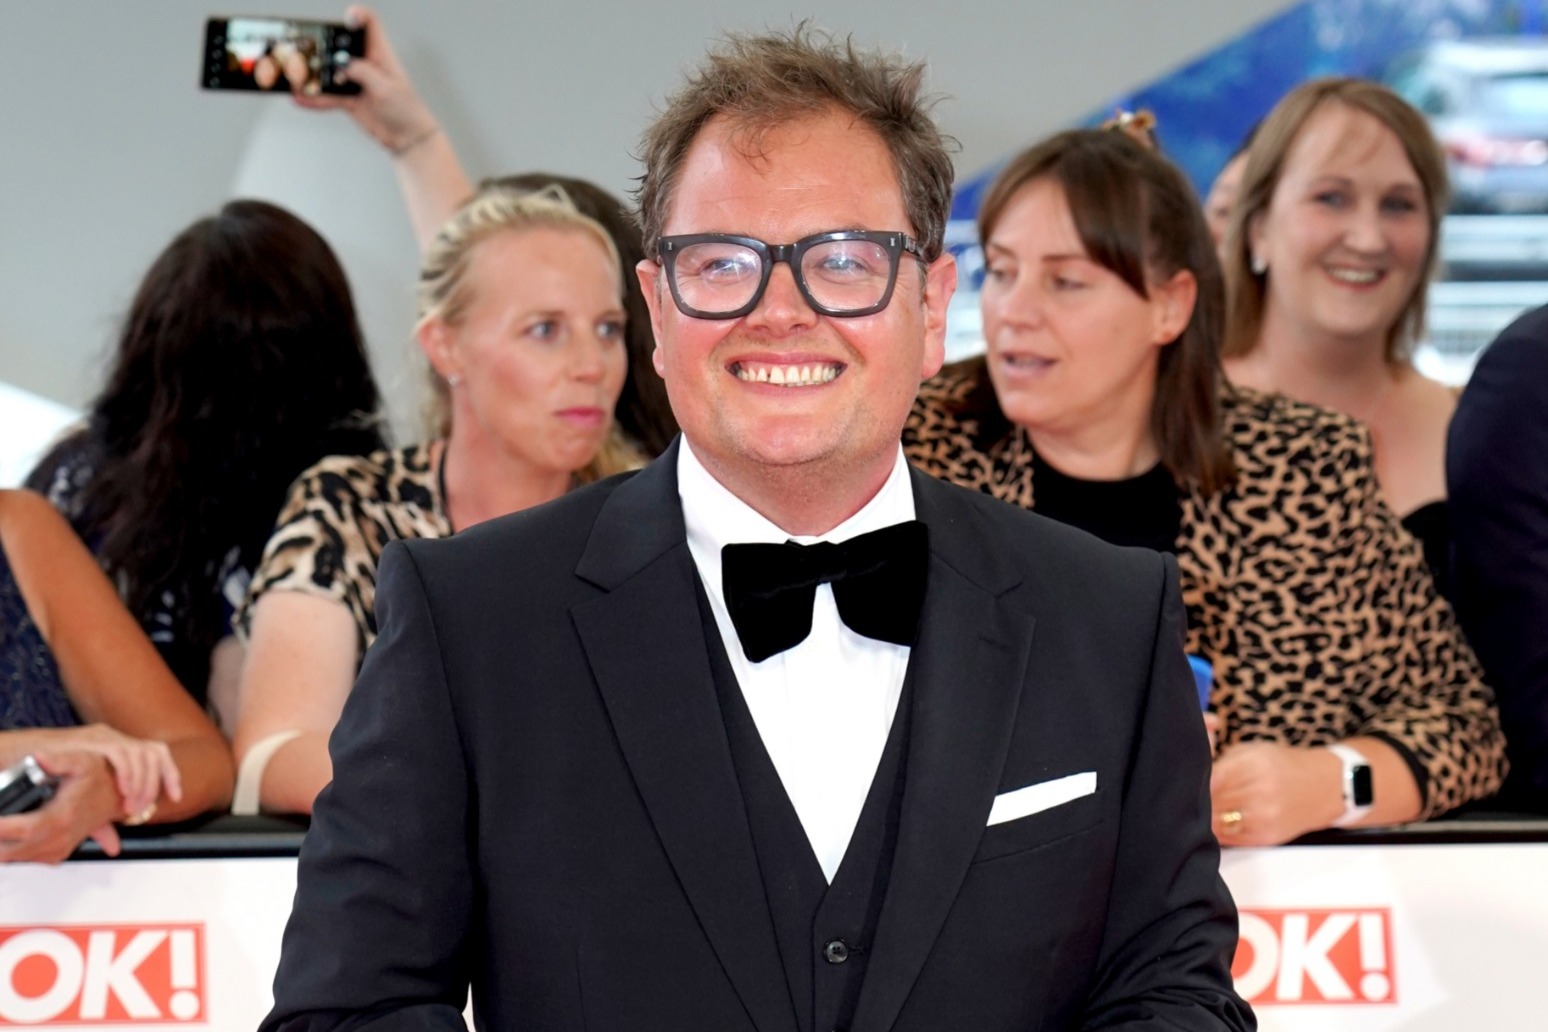 Alan Carr to host Royal Variety Performance 2021 